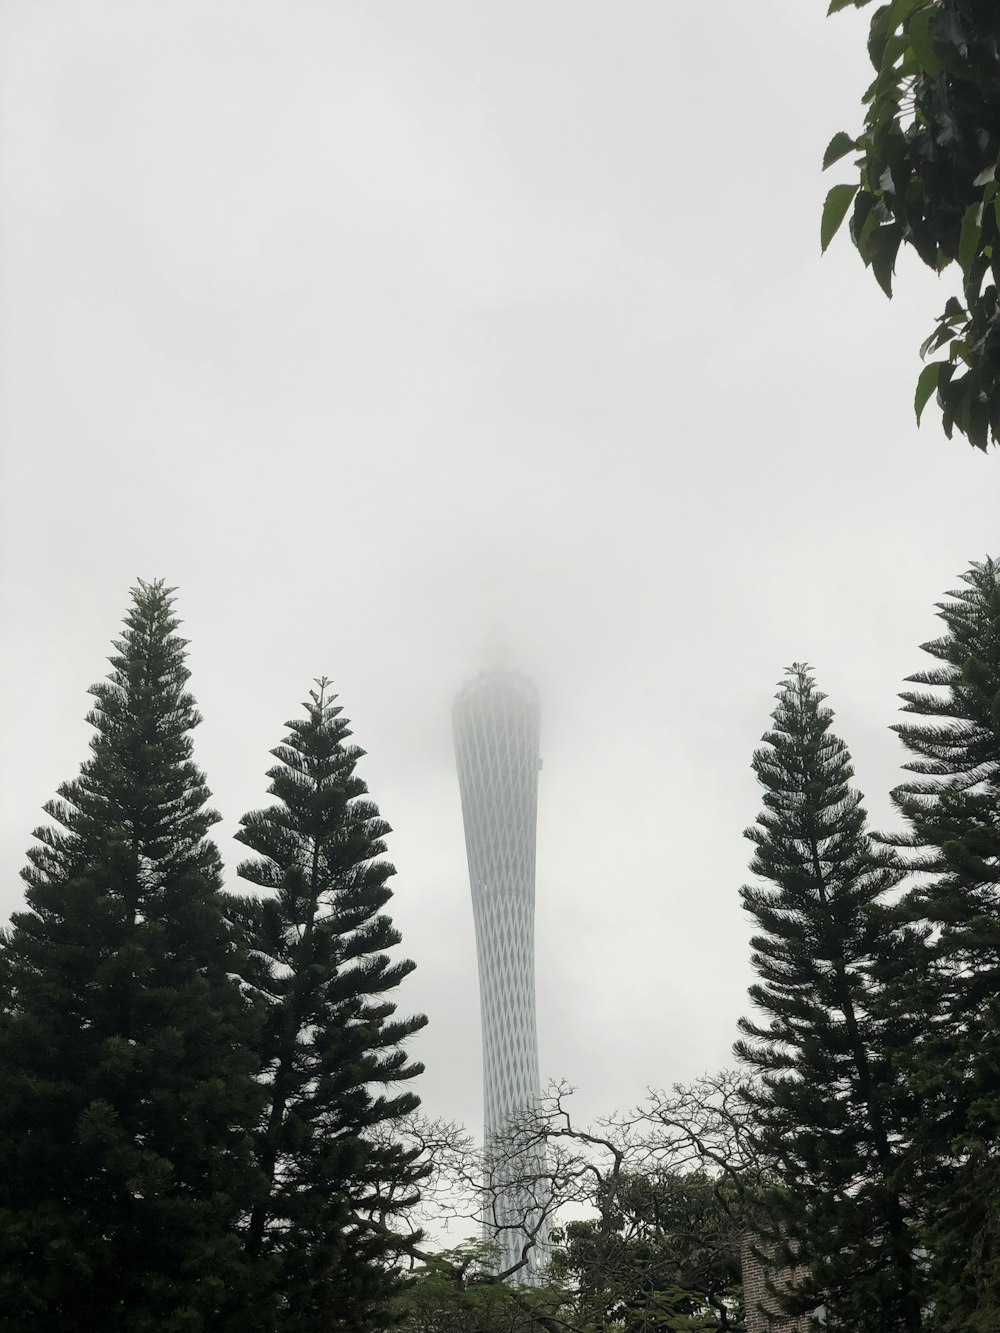 a tall tower towering over a forest of trees